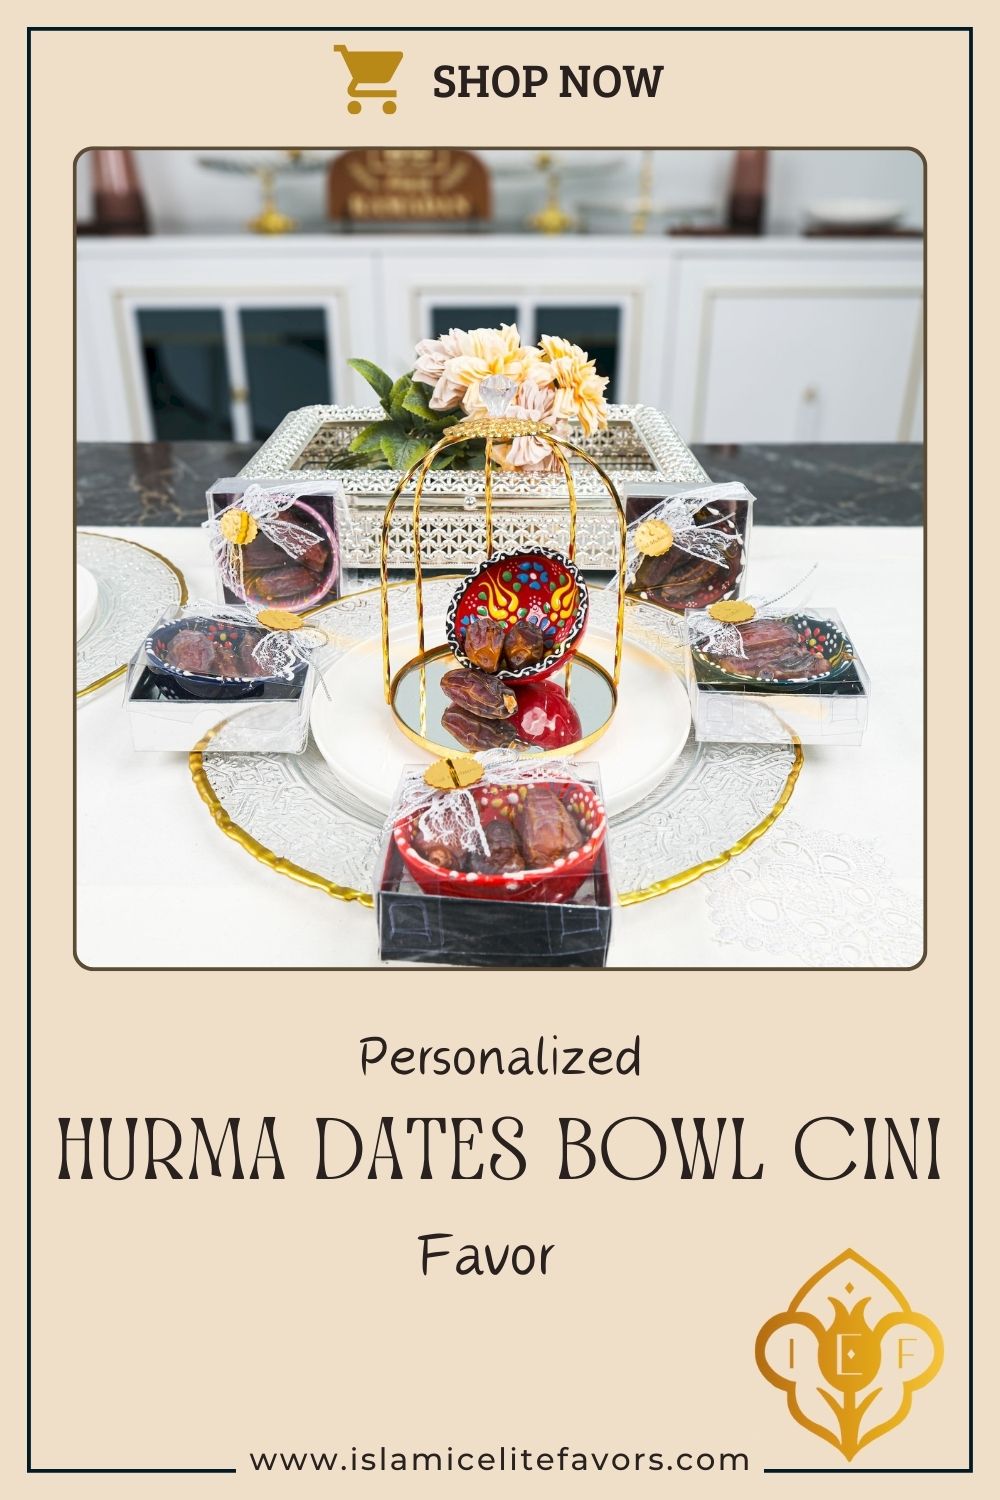 Personalized Hurma Dates in Cini Bowl Favors Ramadan Eid Islamic Gift - Islamic Elite Favors is a handmade gift shop offering a wide variety of unique and personalized gifts for all occasions. Whether you're looking for the perfect Ramadan, Eid, Hajj, wedding gift or something special for a birthday, baby shower or anniversary, we have something for everyone. High quality, made with love.